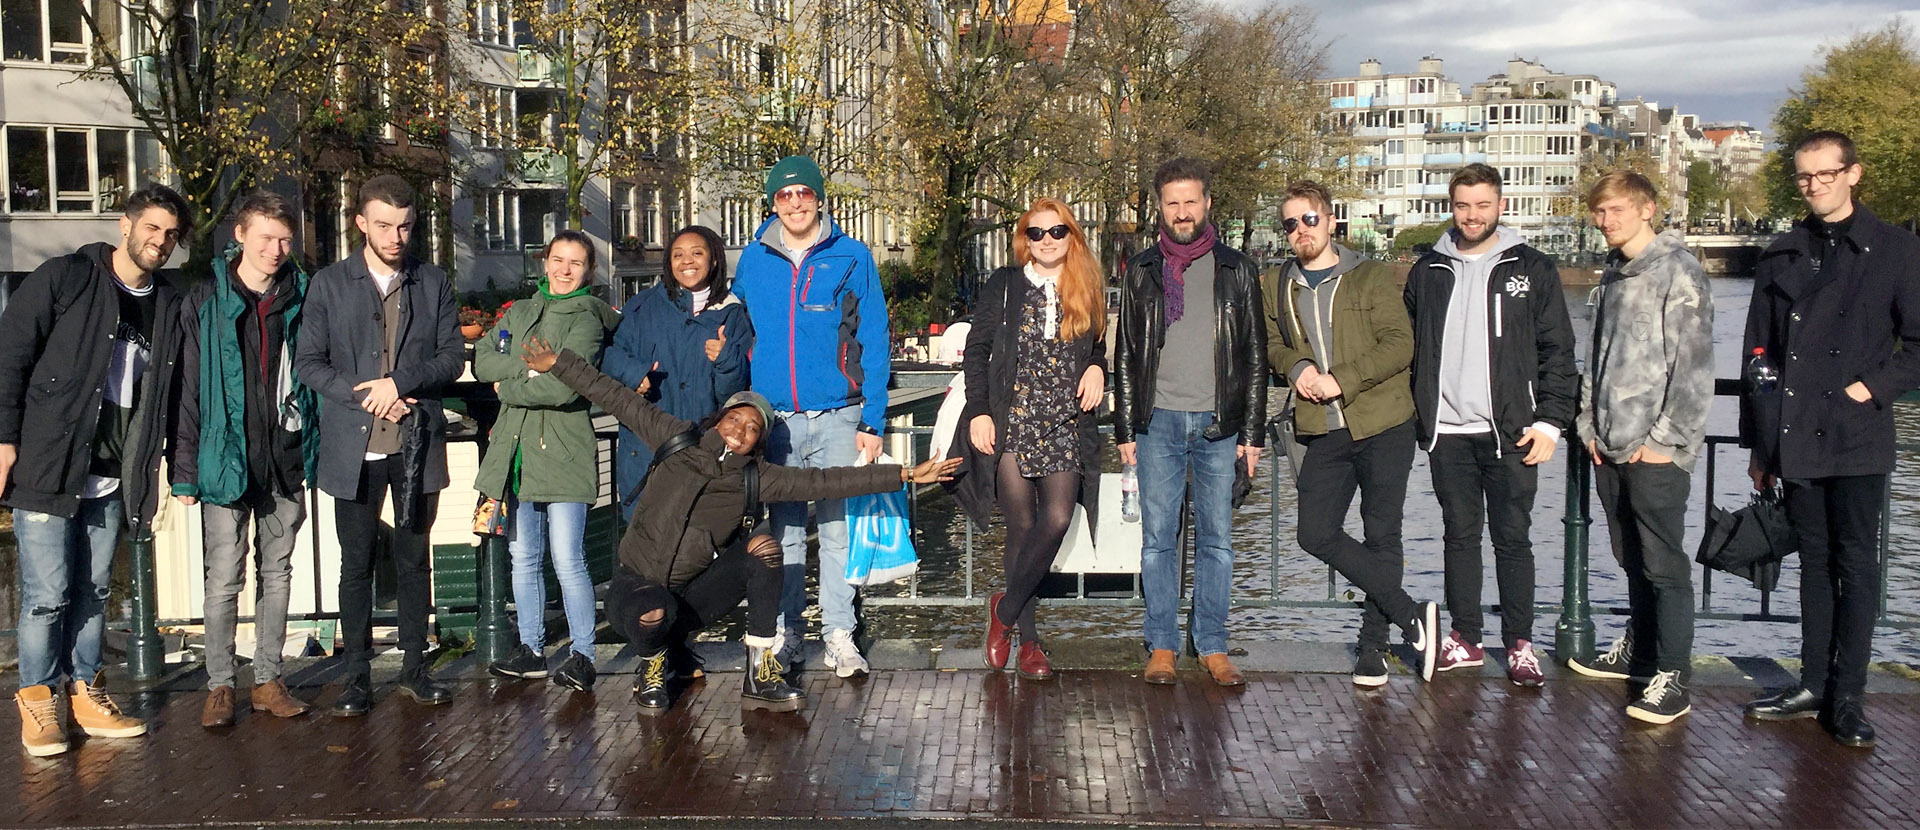 Solent's music students on a bridge over a canal in Amsterdam